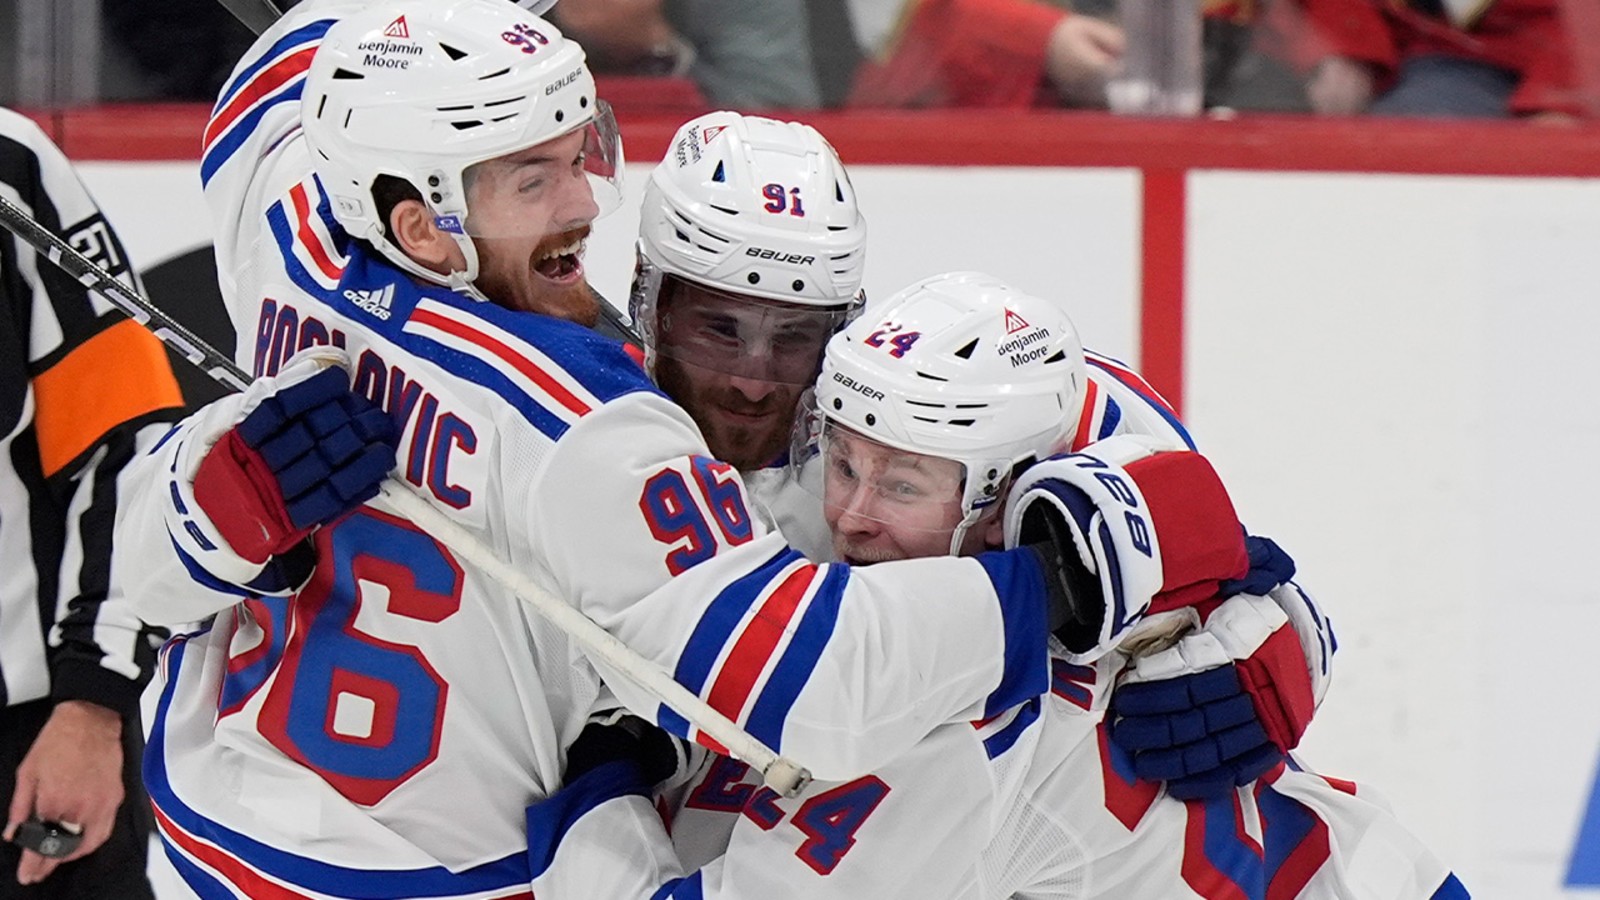 Rangers look to go up 3-1 in Stanley Cup Eastern Conference Finals